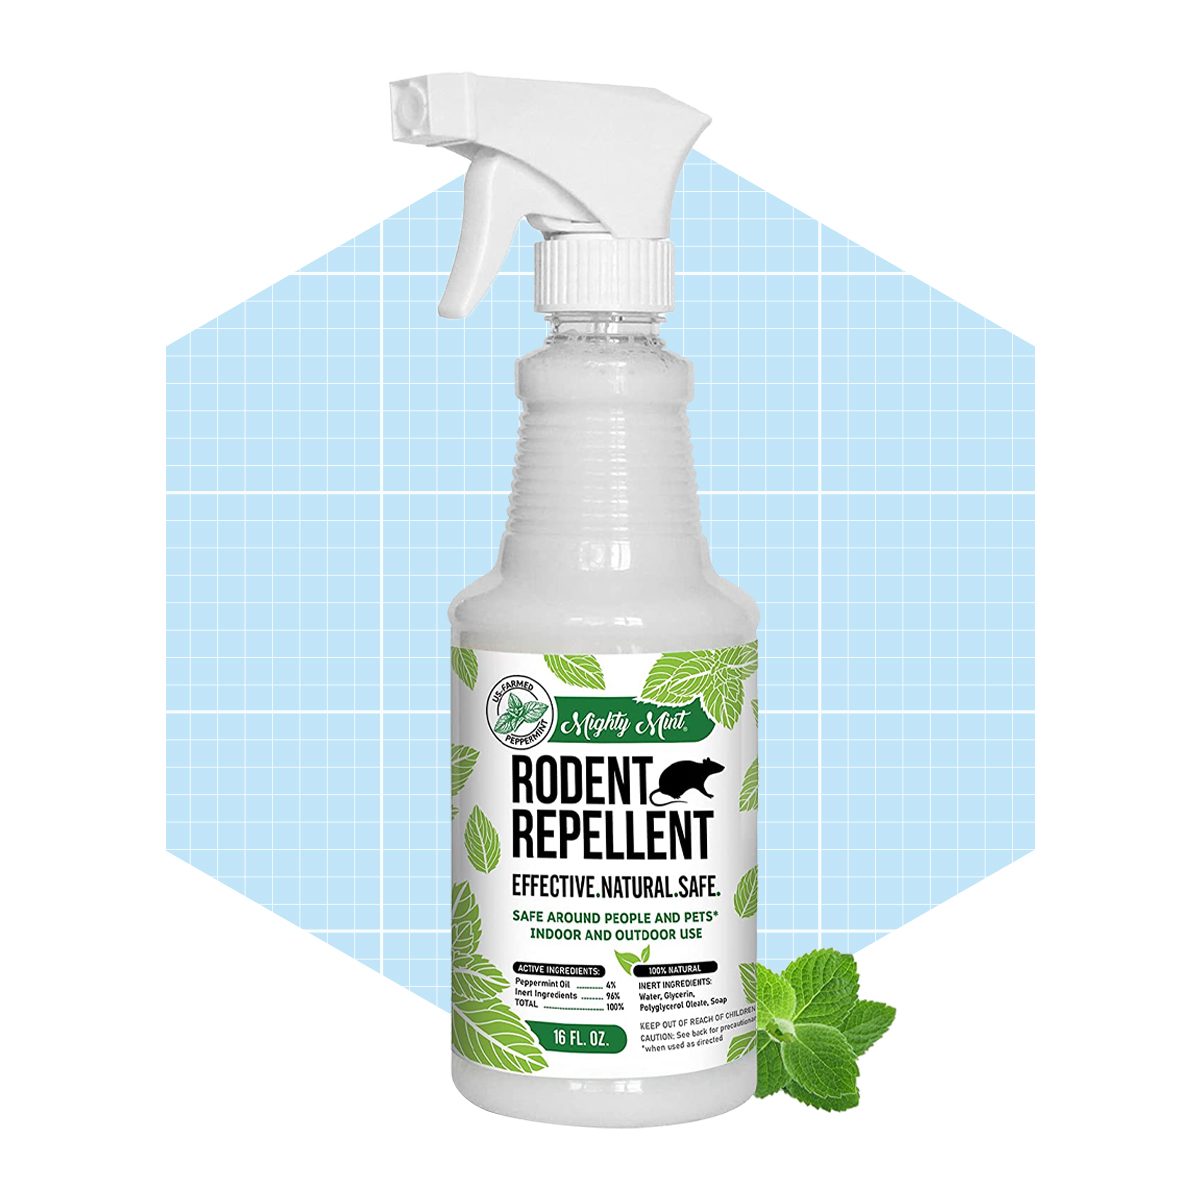 Mighty Mint 16oz Peppermint Oil Rodent Repellent Spray Ecomm Amazon.com